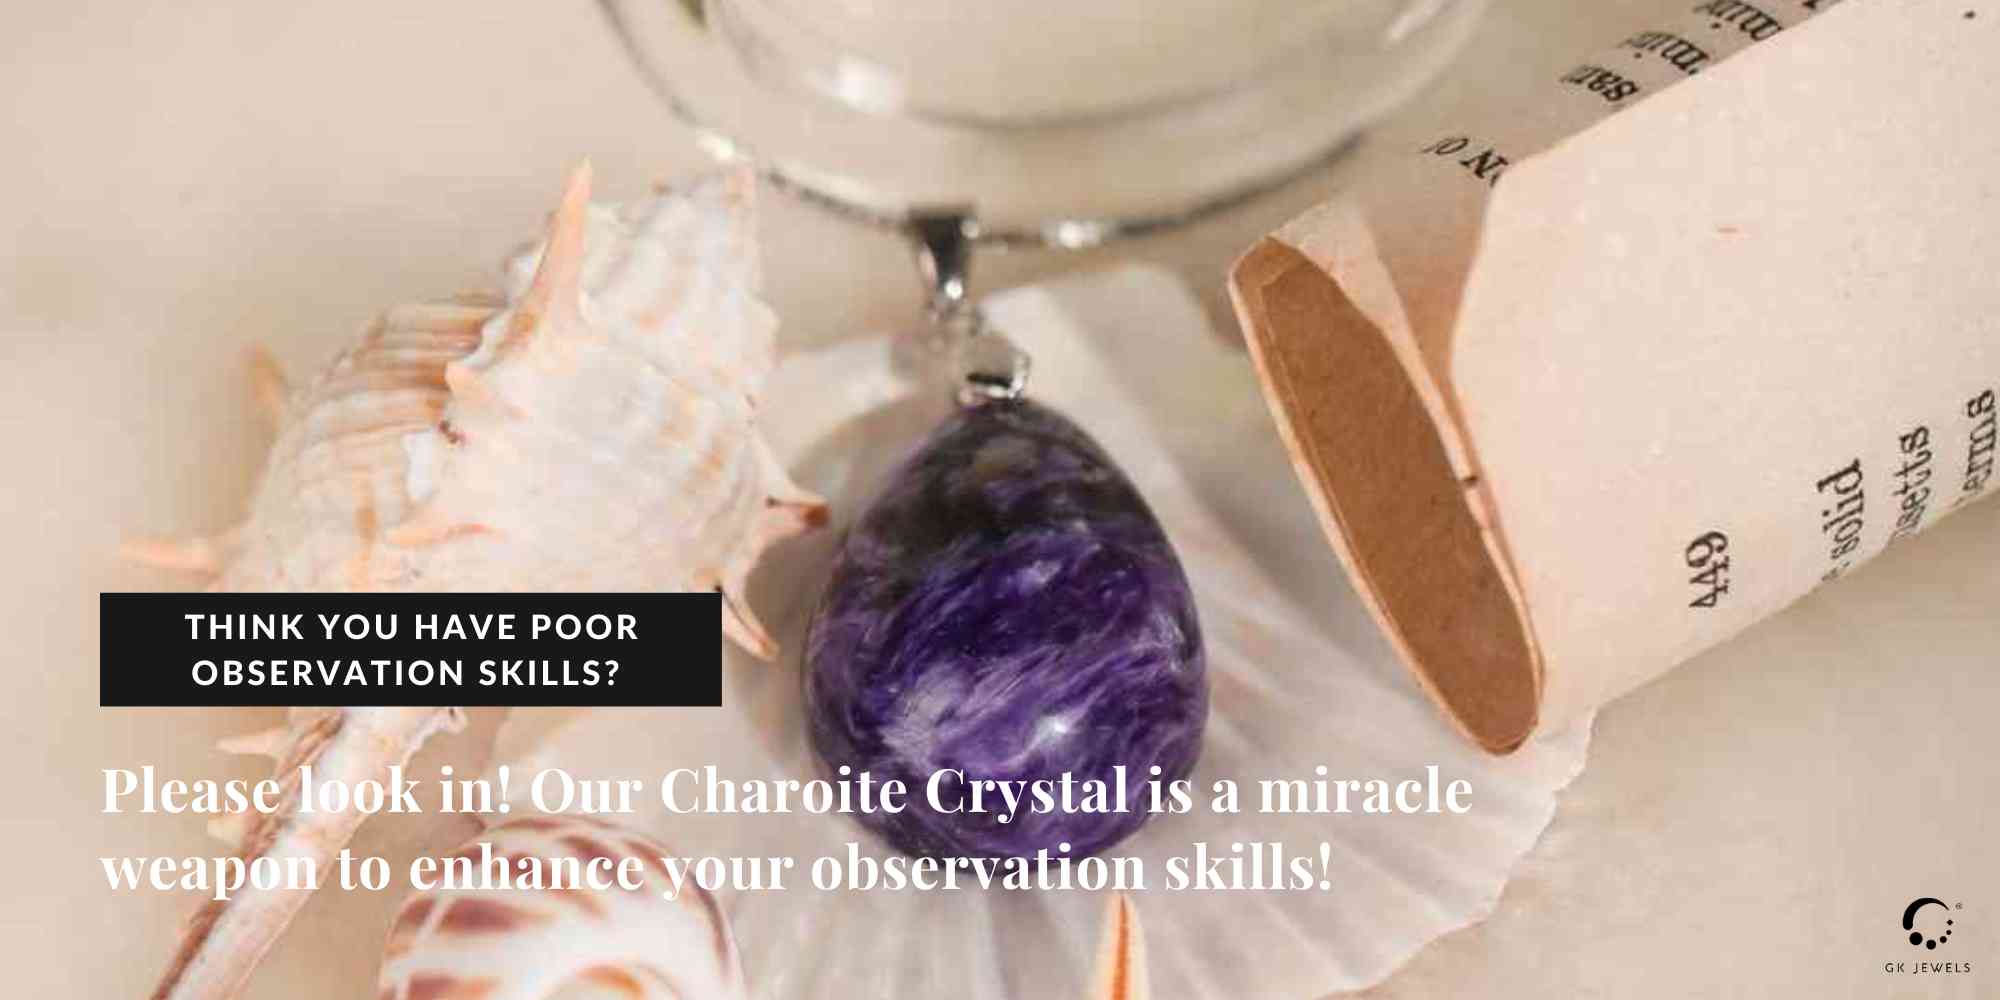 Think you have poor observation skills? Please look in! Our Charoite Crystal is a miracle weapon to enhance your observation skills!